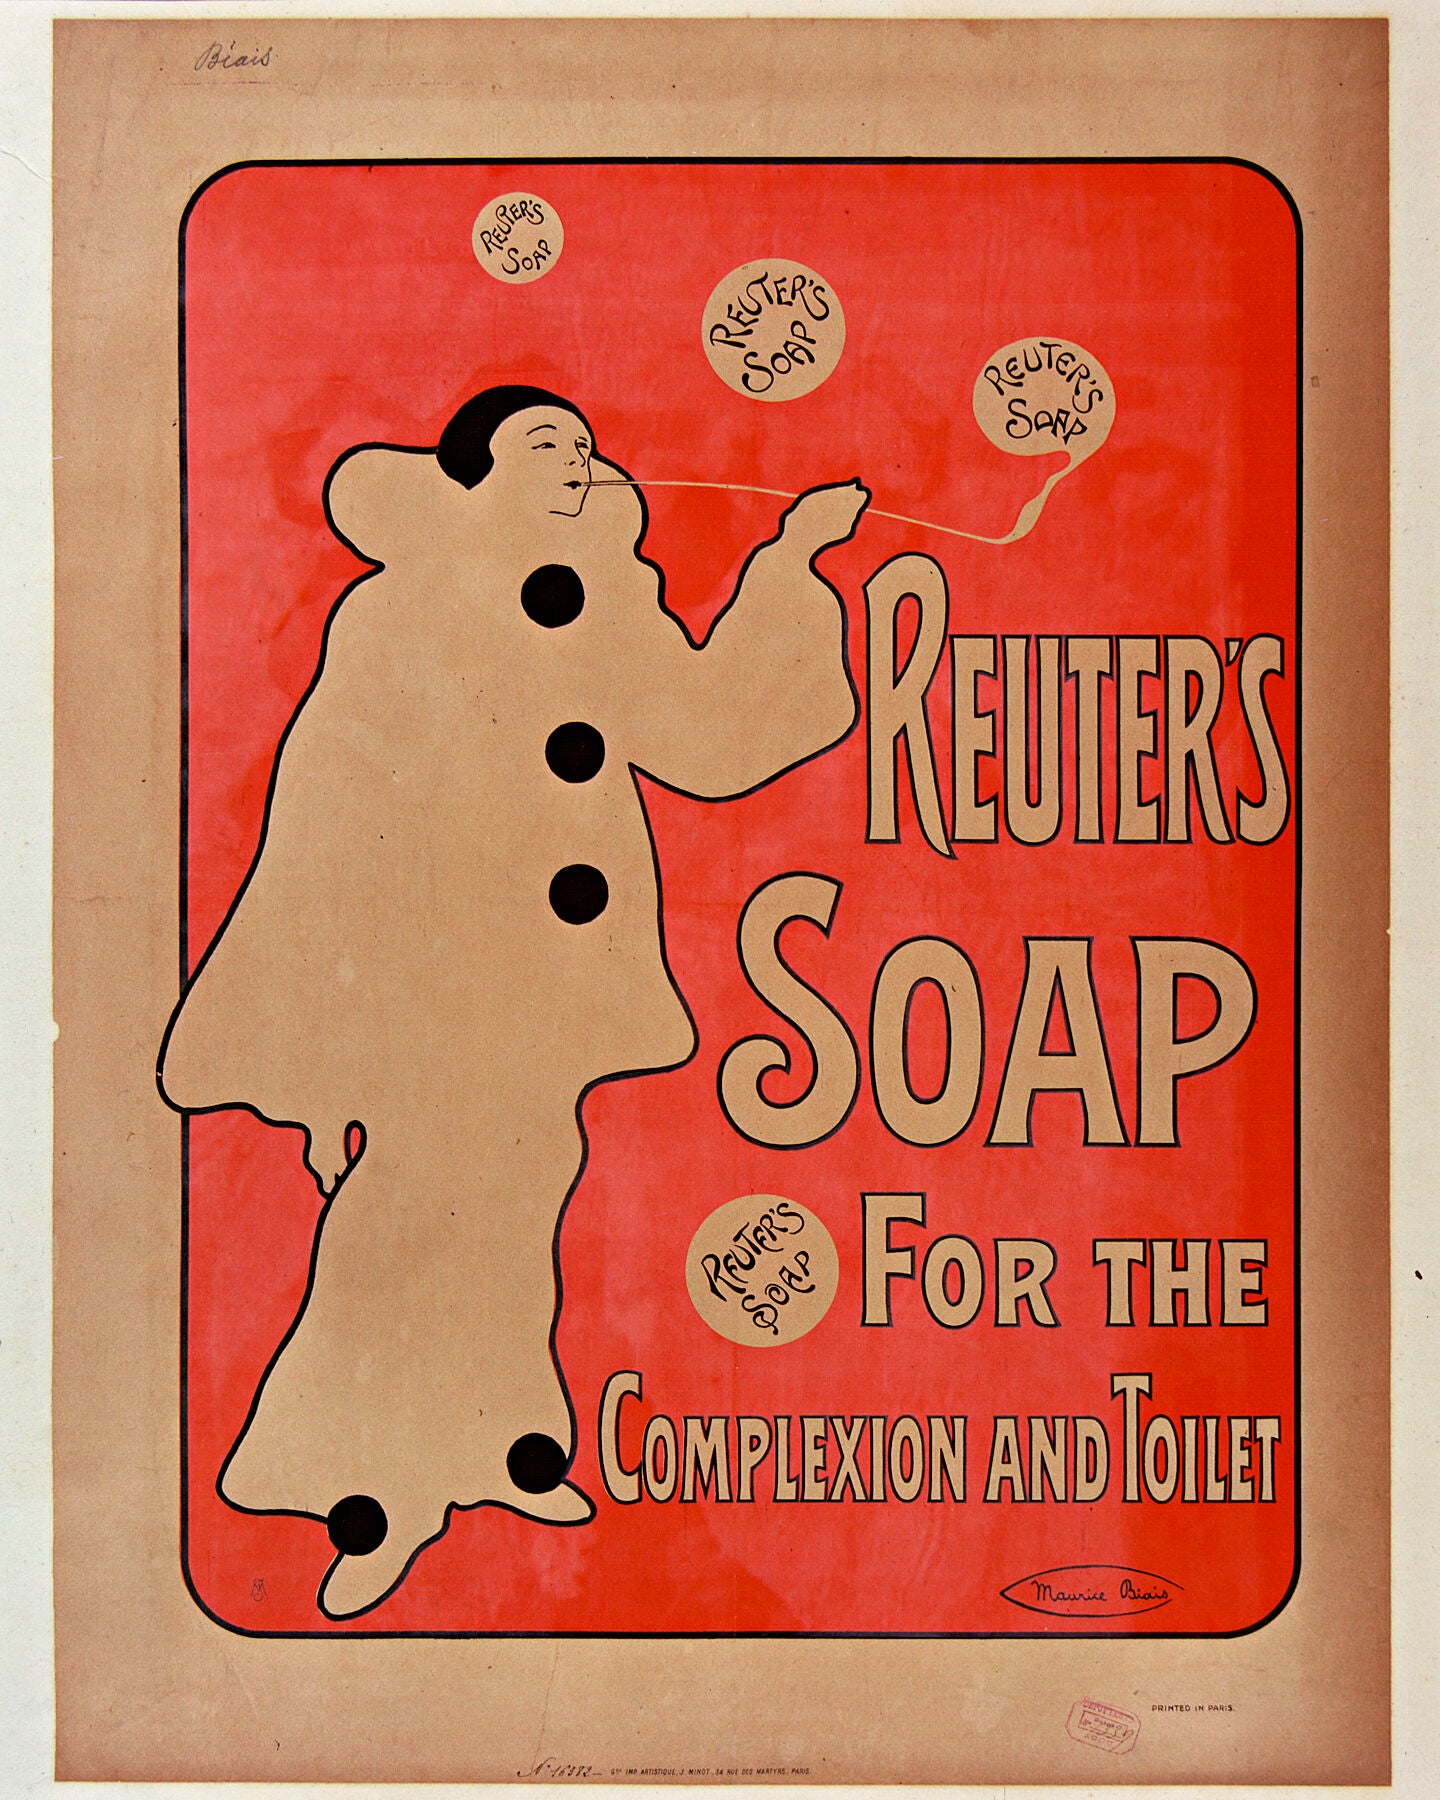 Maurice Biais Reuter's Soap for the Complexion and Toilet - 1908